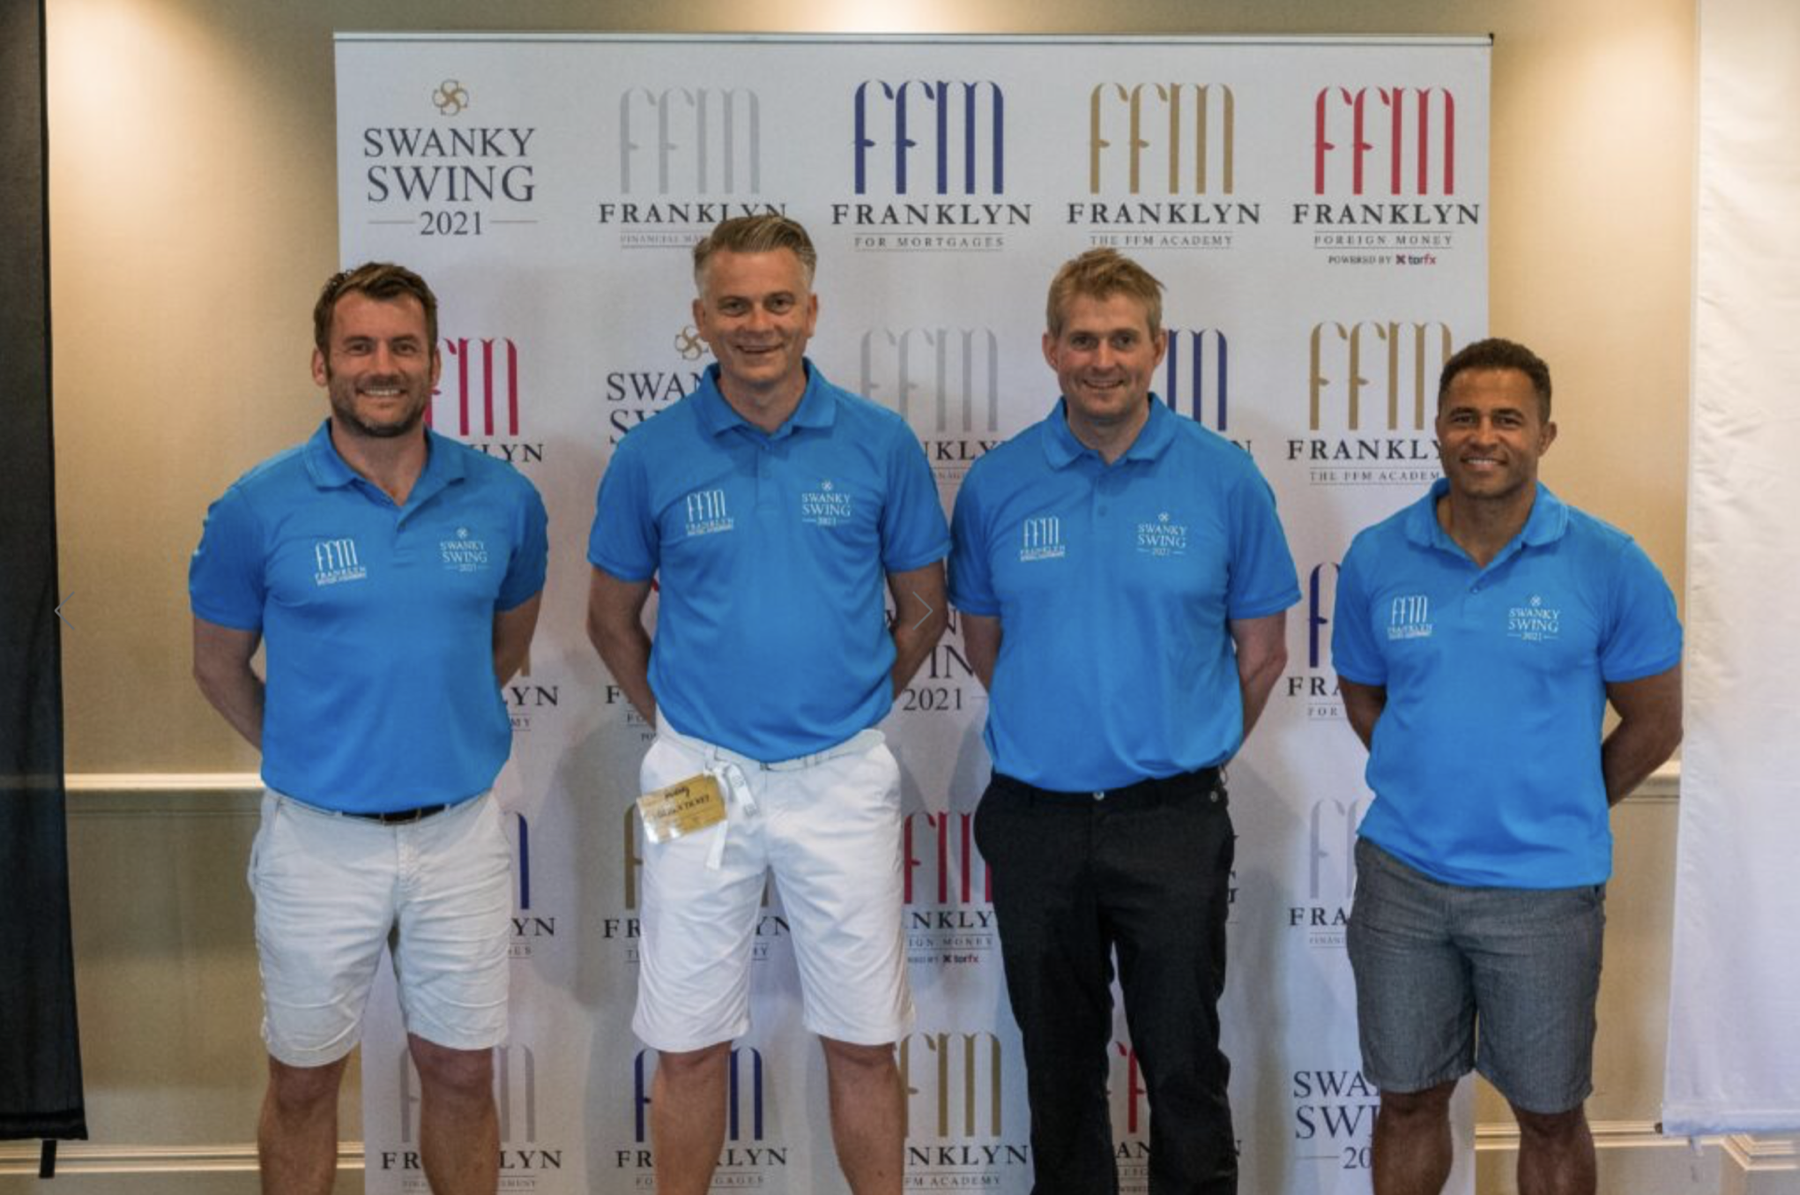  Former England Internationals and Sale Sharks Directors, Mark Cueto (far left) and Jason Robinson (far right), with FFM Managing Director, Andrew Chatterton (middle left) and Business Relations Director, Ian Cottrill (middle right) 